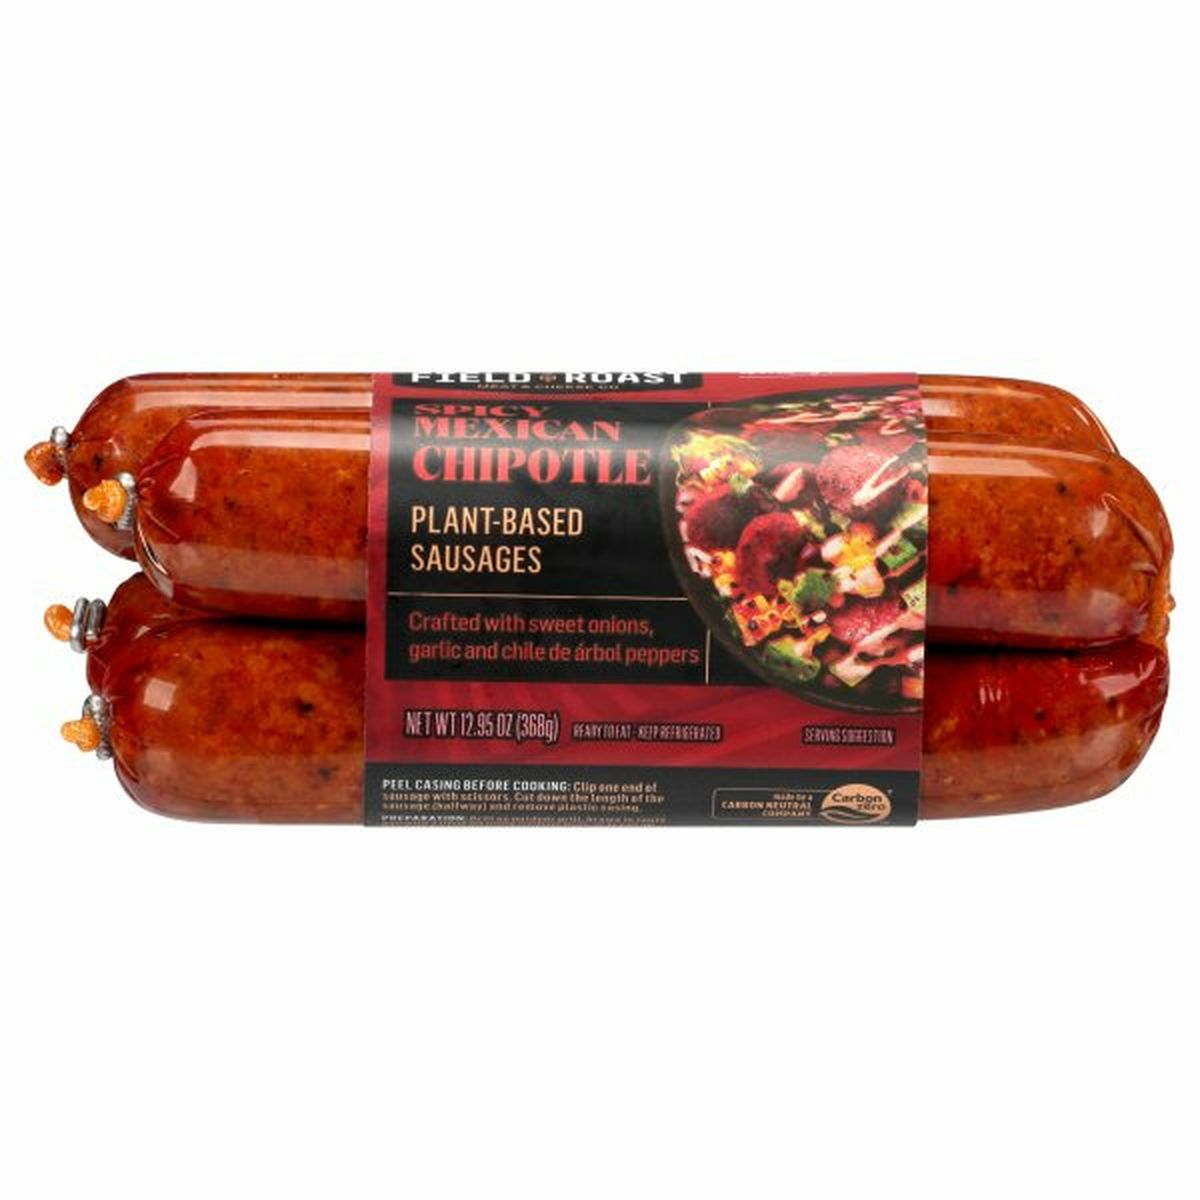 Calories in Field Roast Sausages, Spicy Mexican Chipotle, Plant-Based